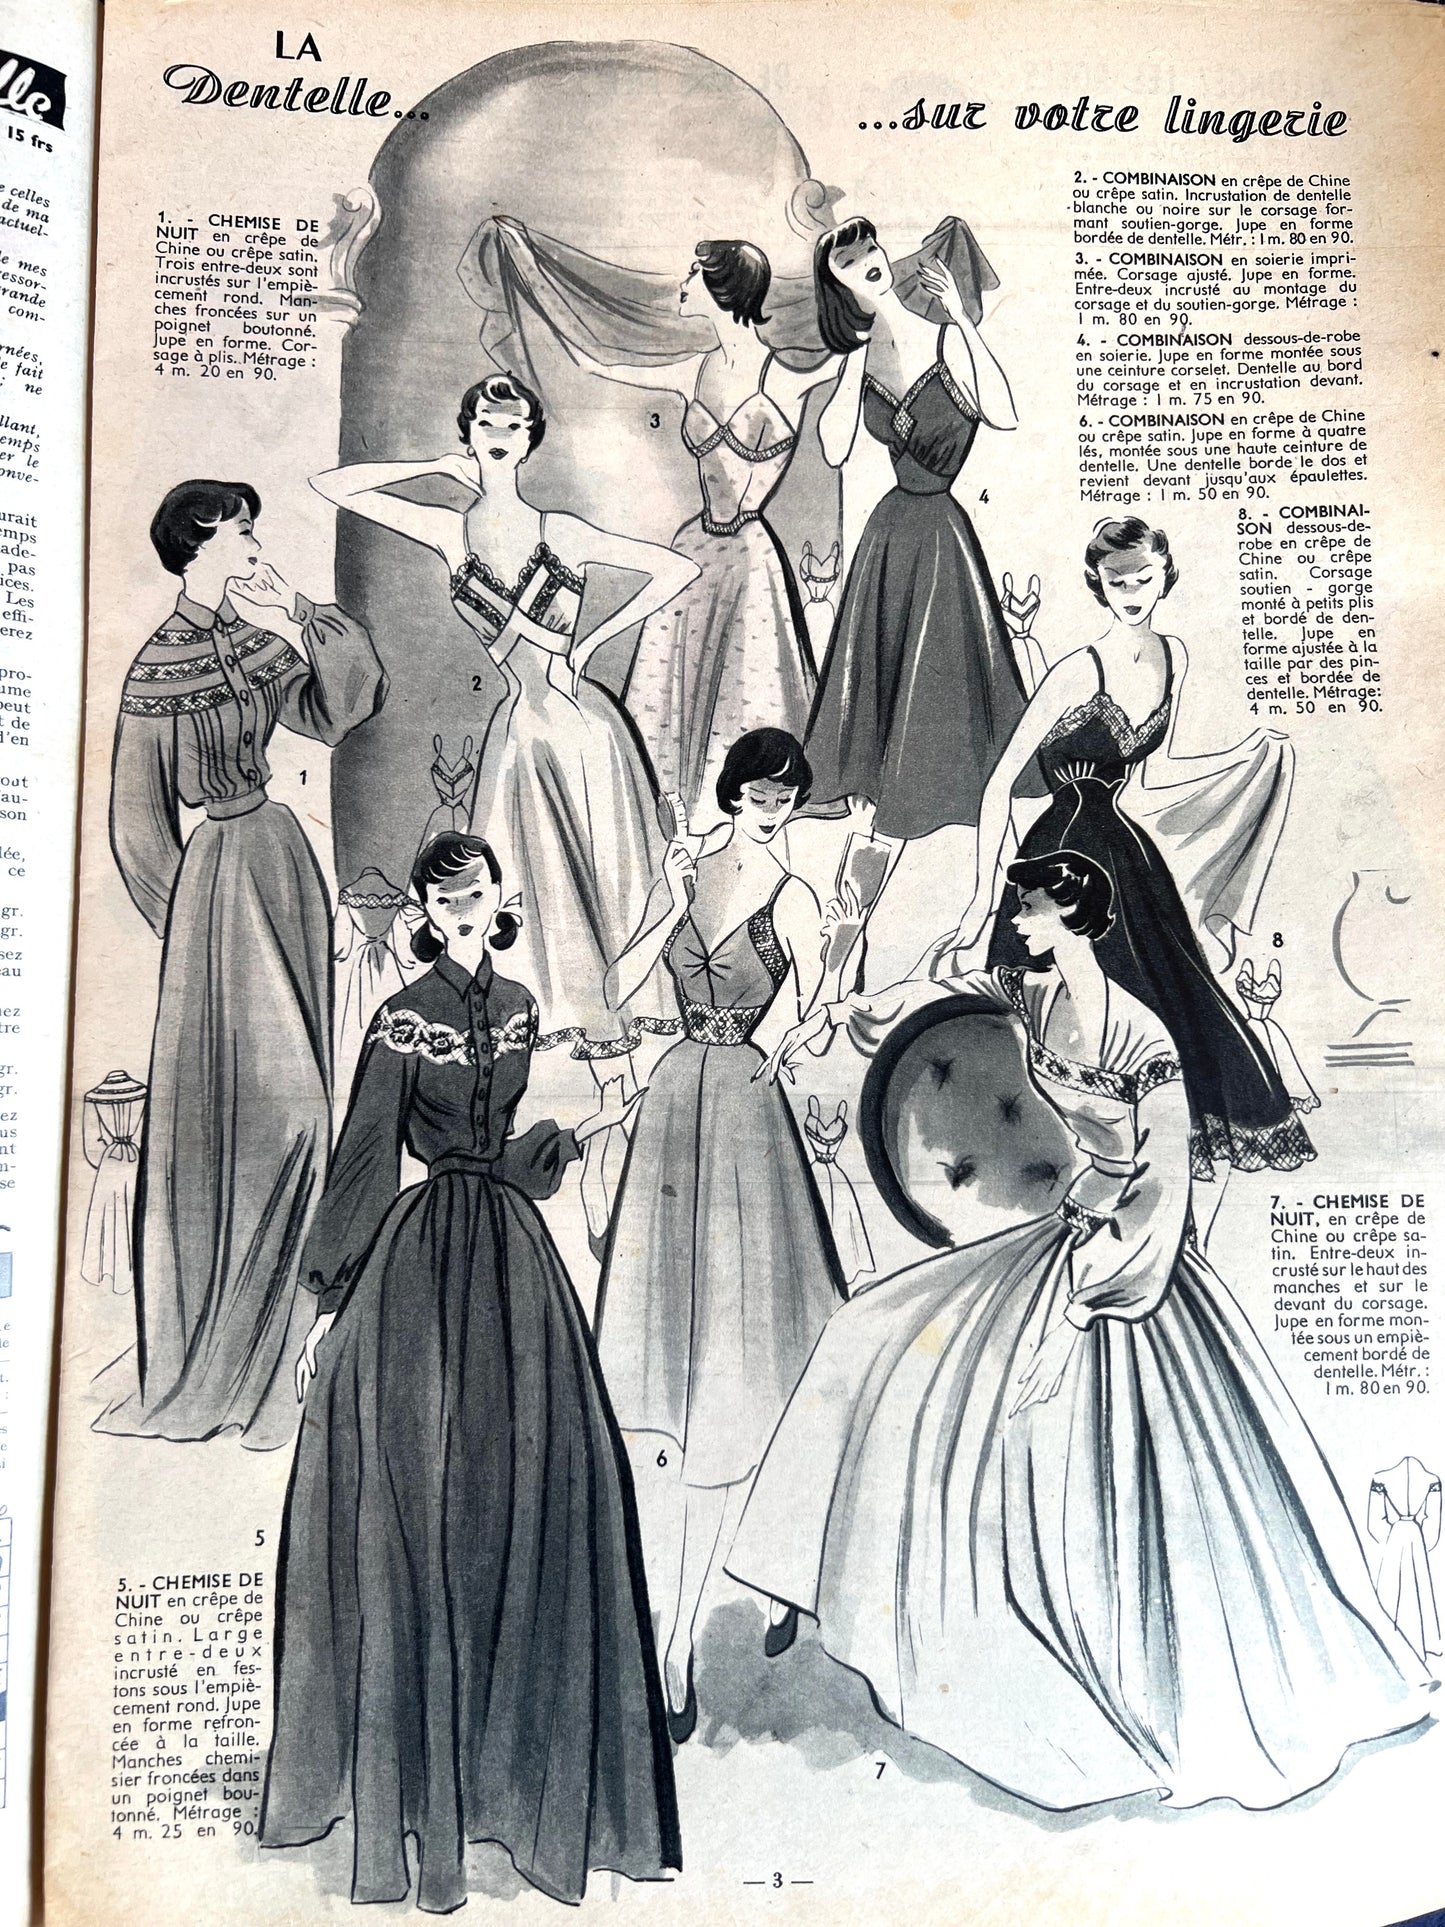 The Most Fashionable Bedtime in 1950 French Women's Magazine Votre Mode